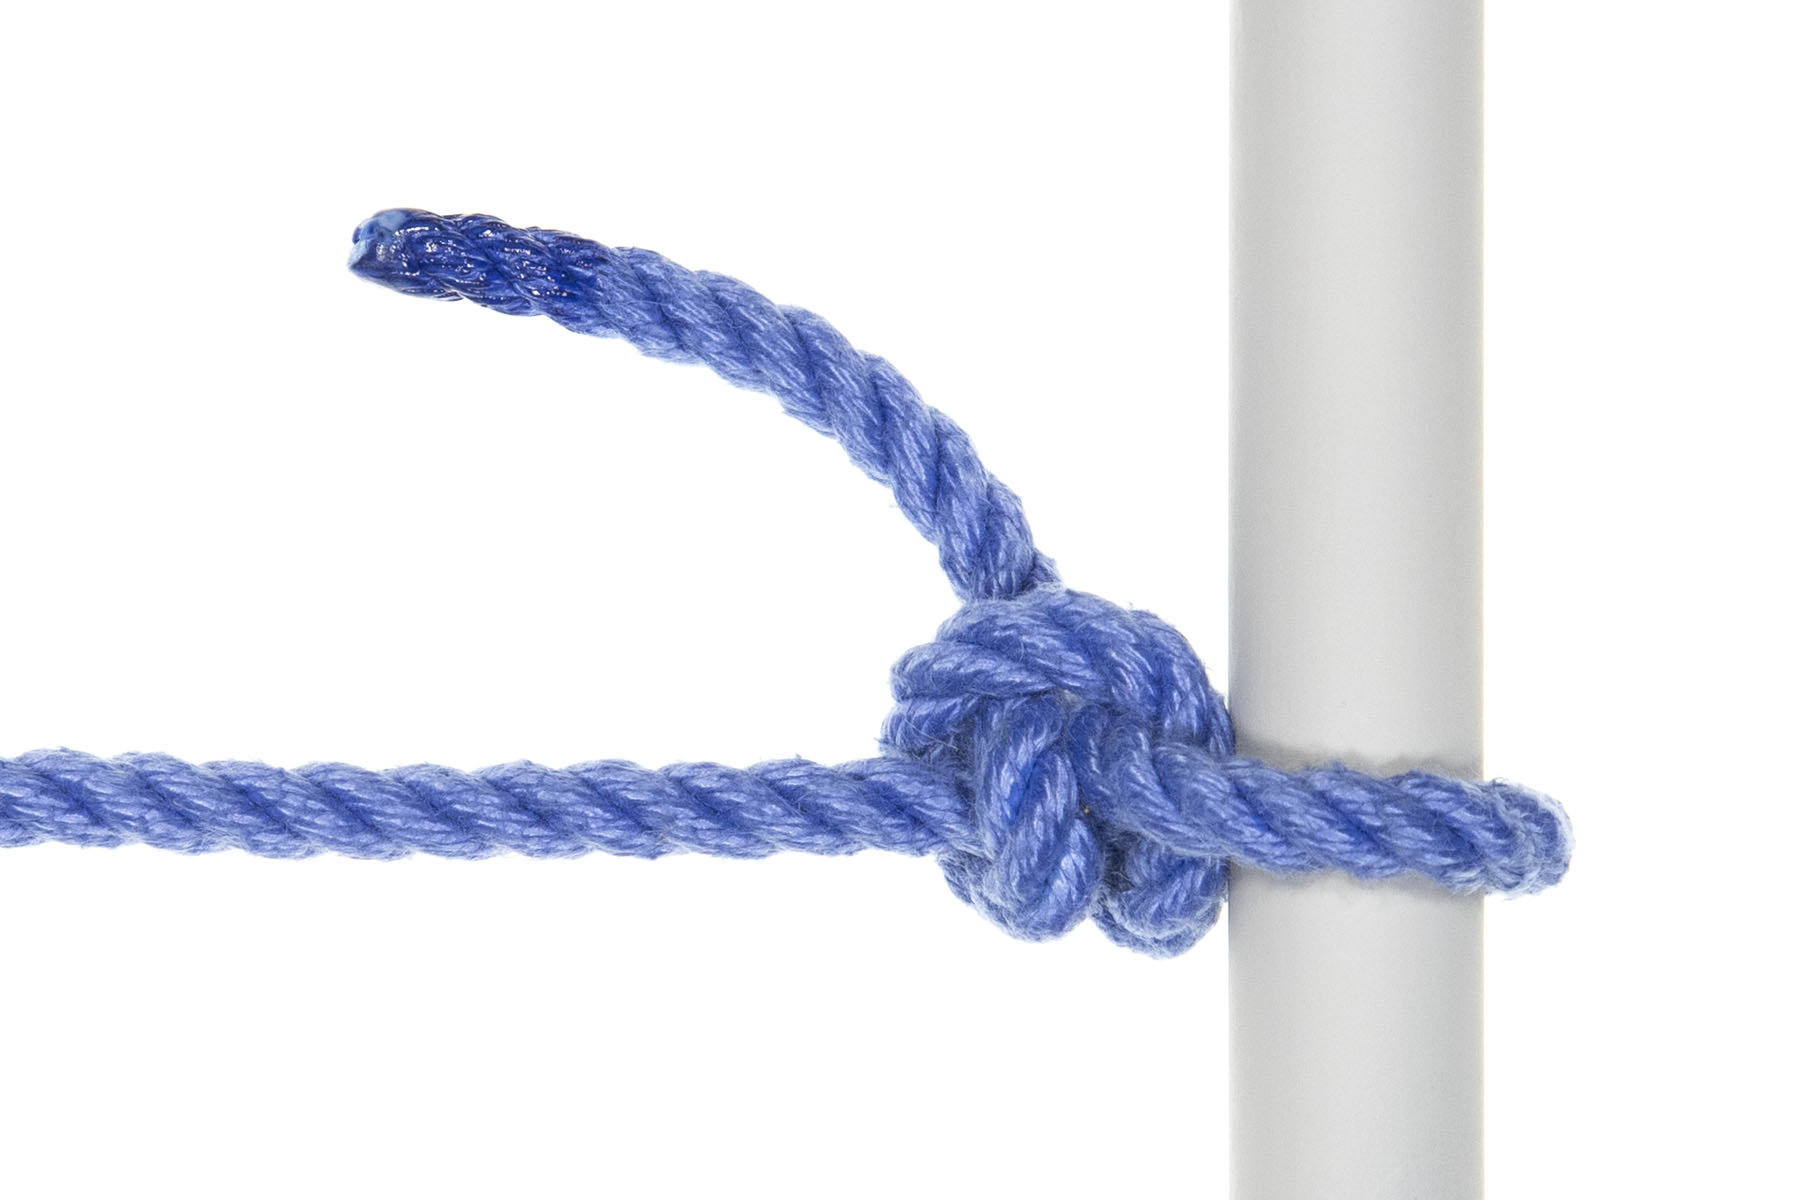 A one inch gray pole crosses the frame vertically. A blue rope enters from the left and is tied to the pole with two half hitches. There is a single pass of rope around the pole, and two snug wraps around the standing part. A short bight exits the knot.